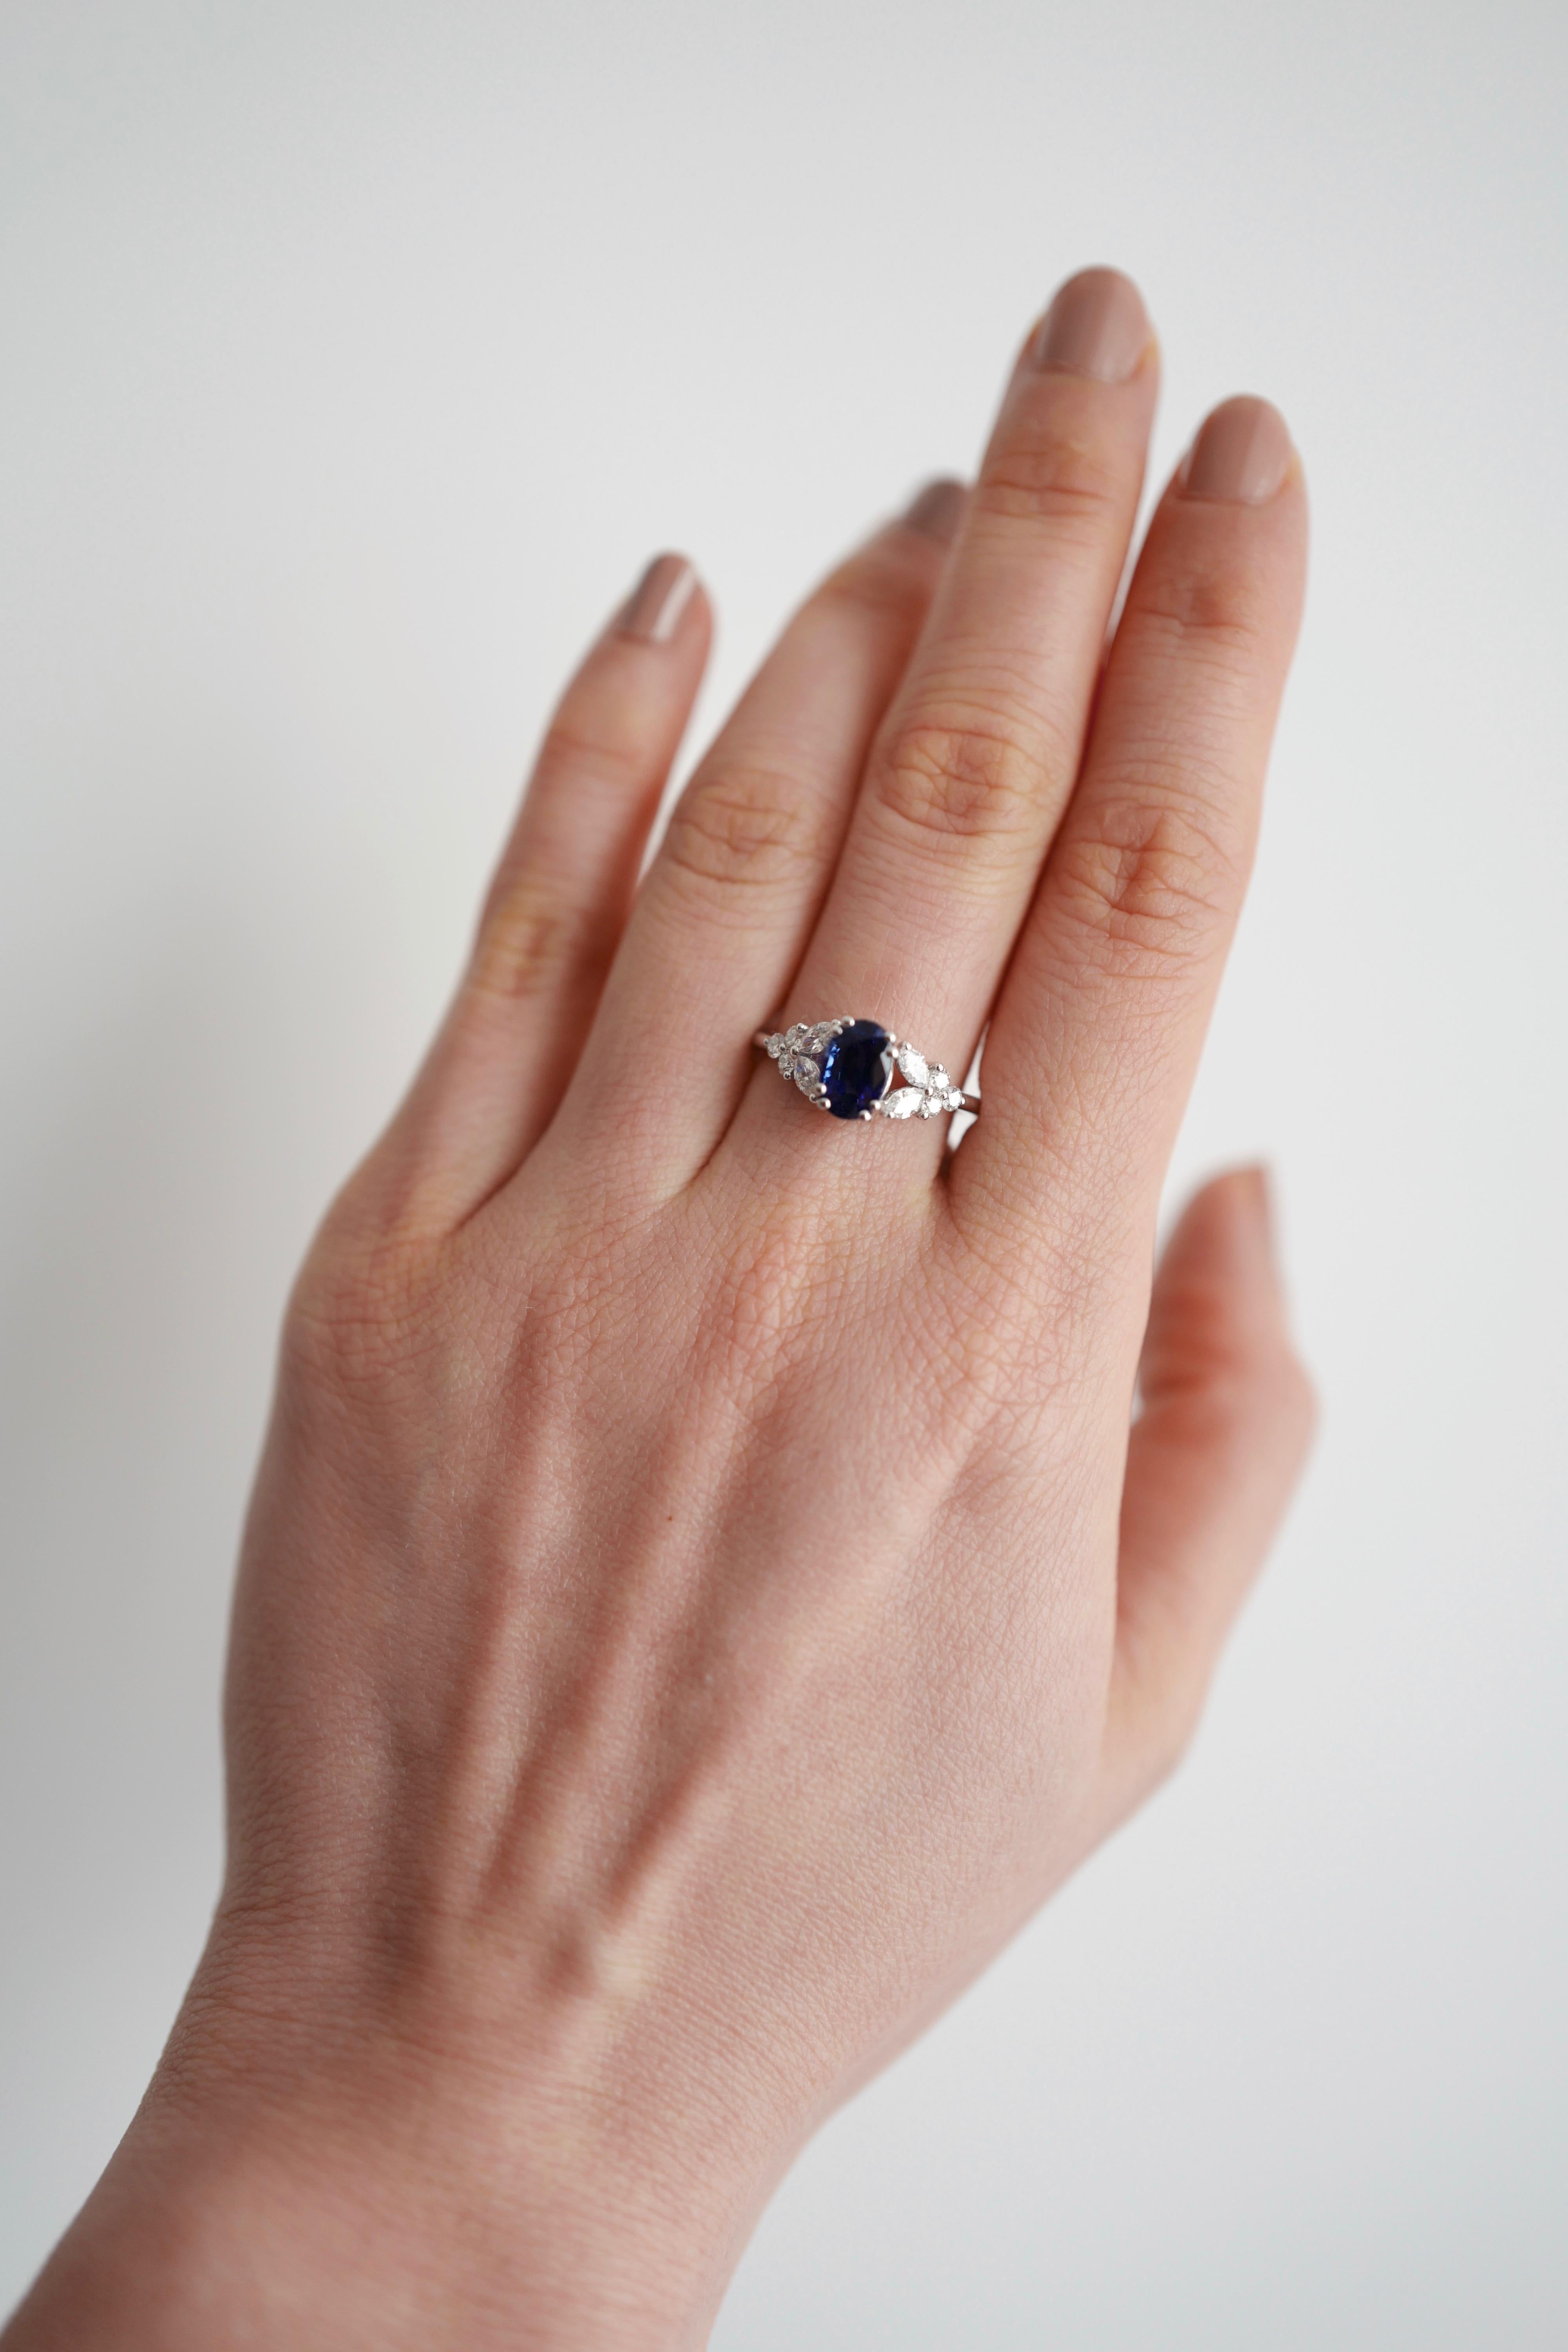 For Sale:  Blue Sapphire Engagement Ring with Marquise Cut Diamond in 18K White Gold 3